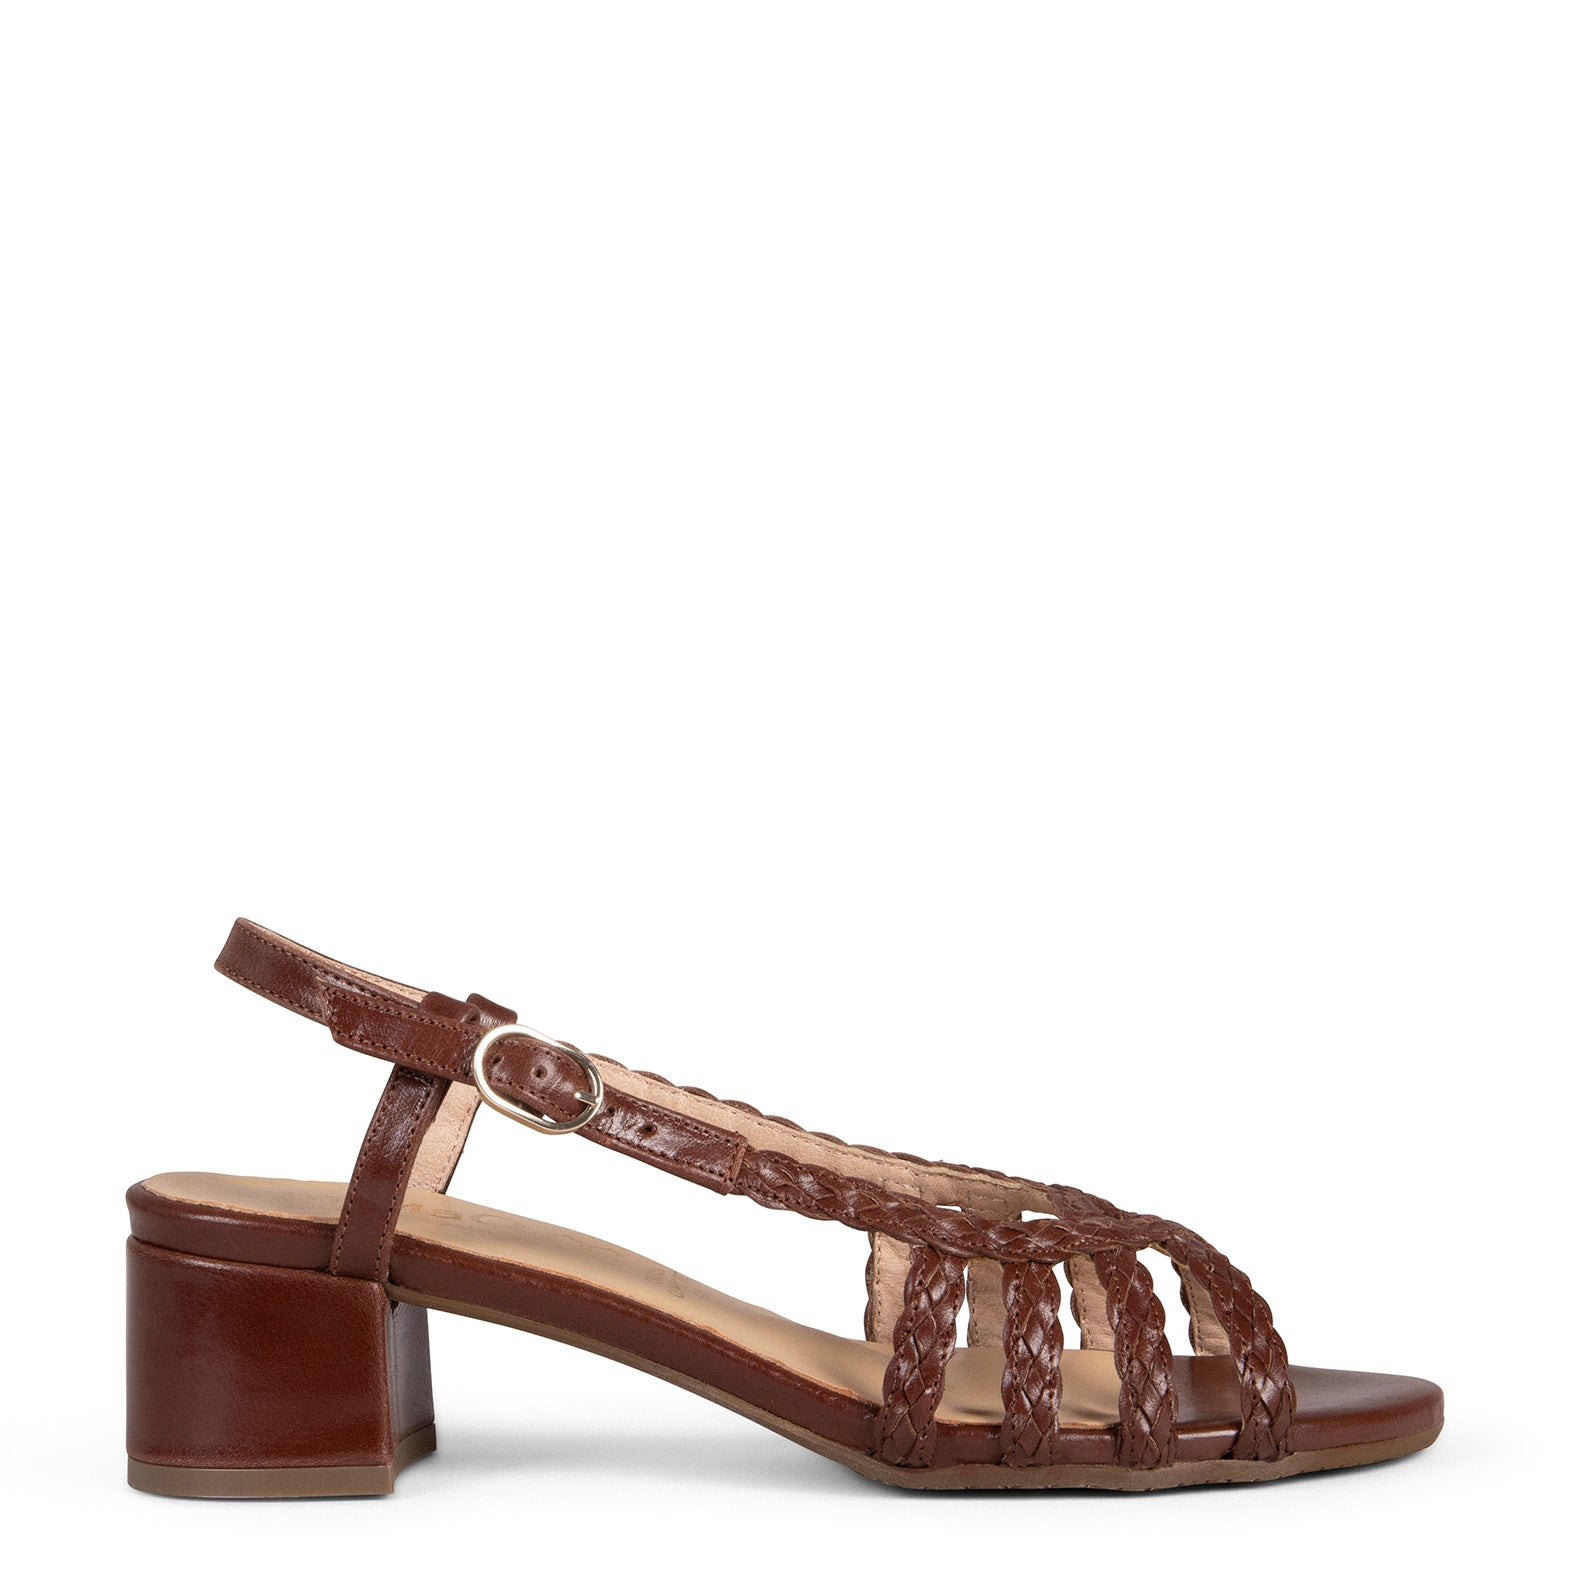 LINA – LEATHER Women Casual Sandals